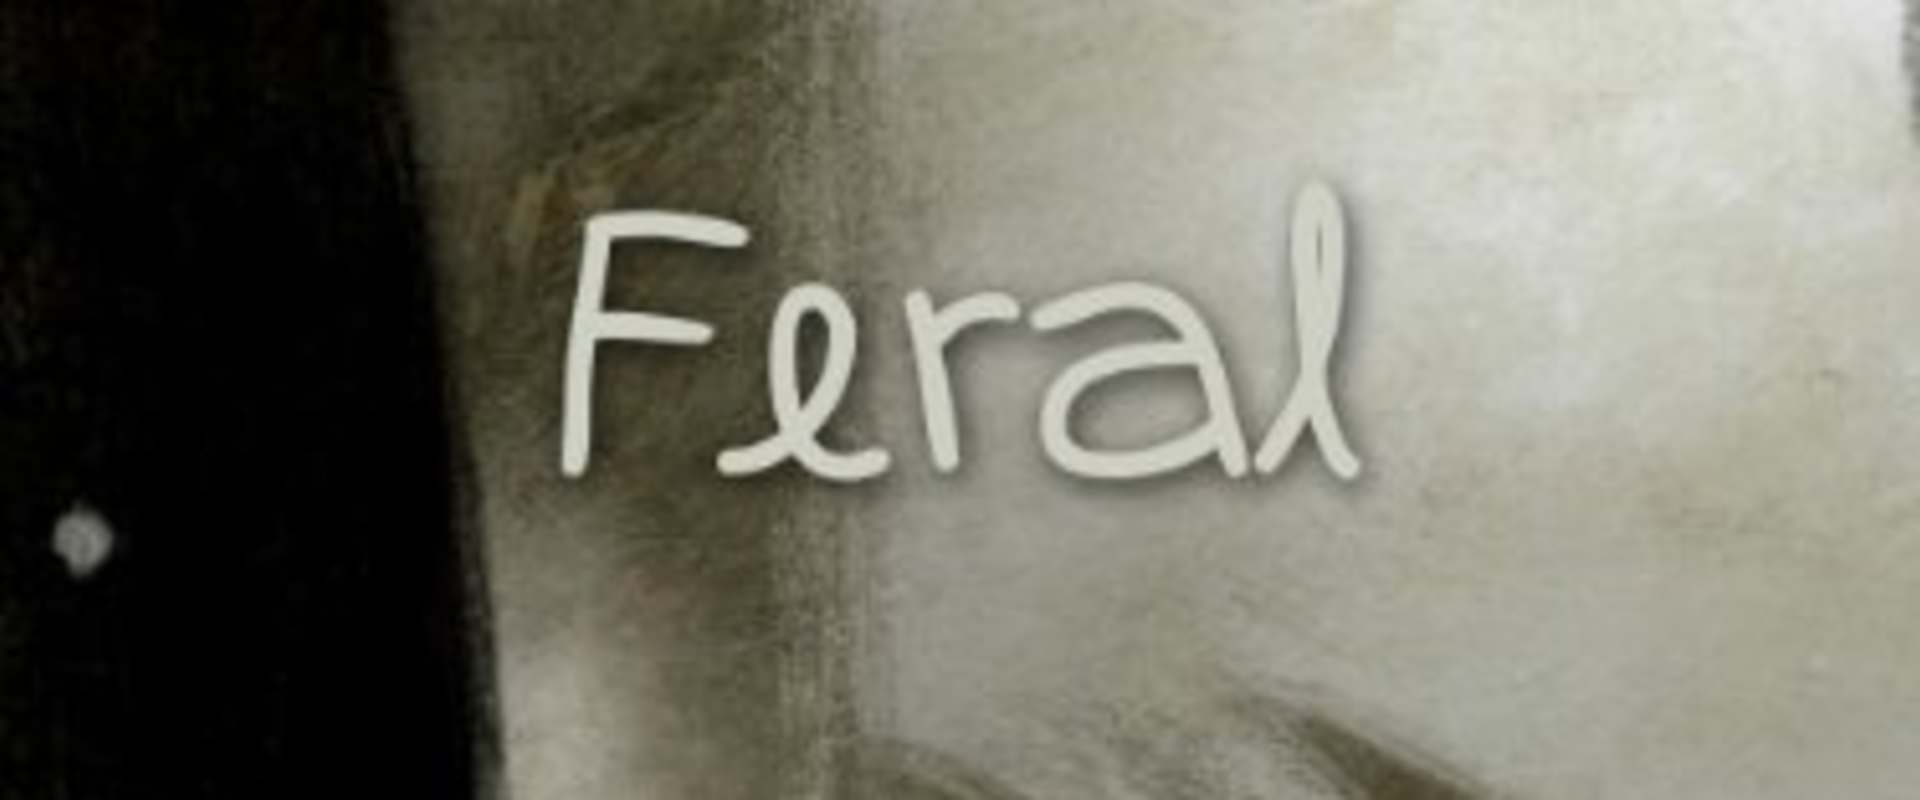 Feral background 1